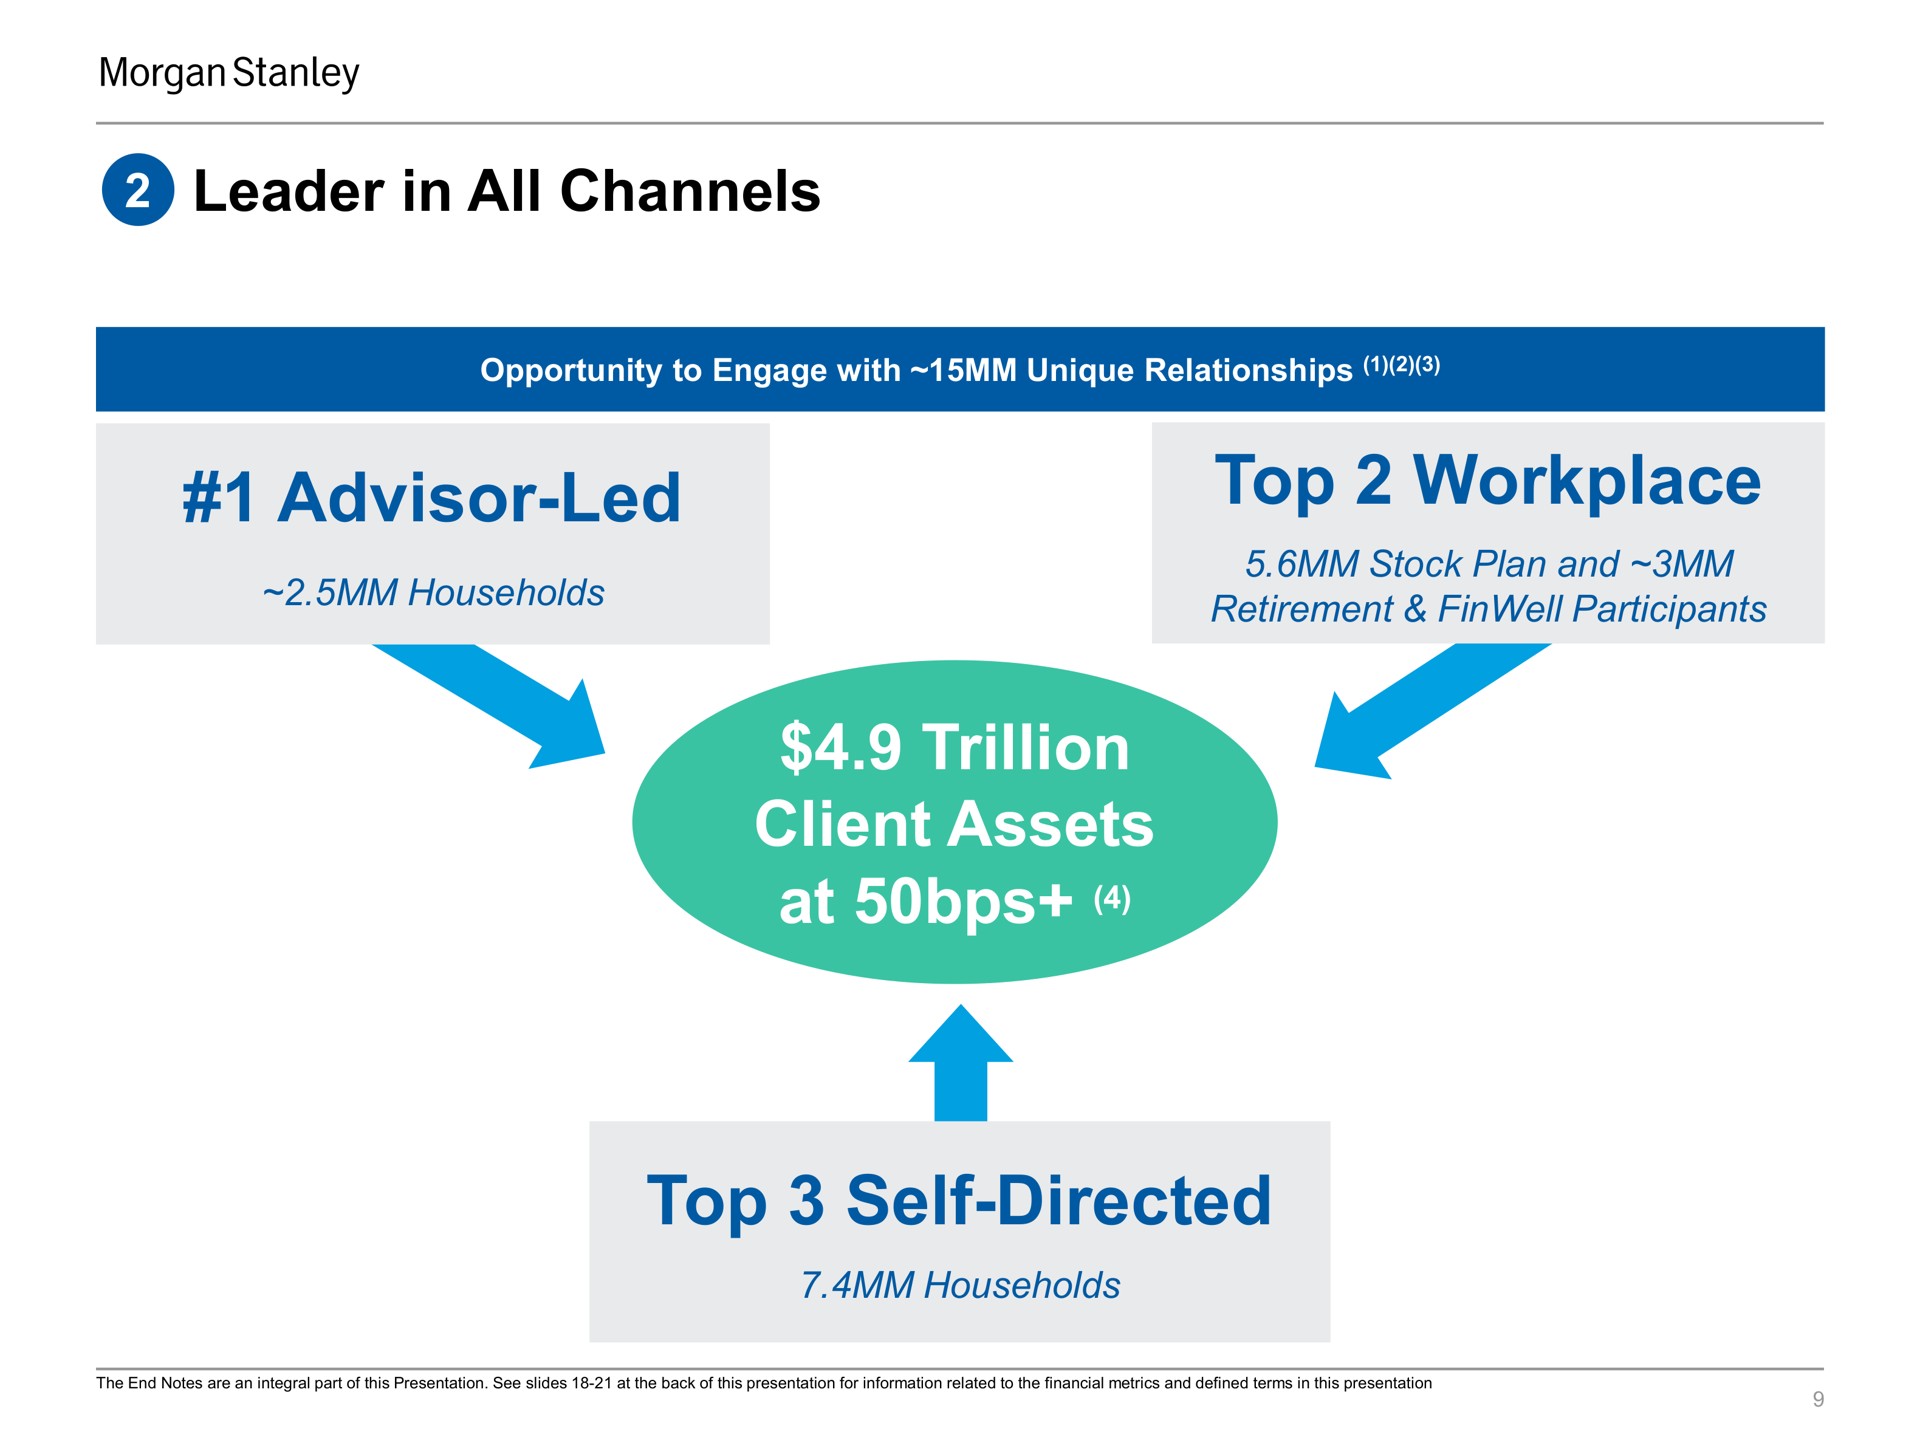 leader in all channels advisor led households top workplace stock plan and retirement participants trillion client assets at top self directed households | Morgan Stanley